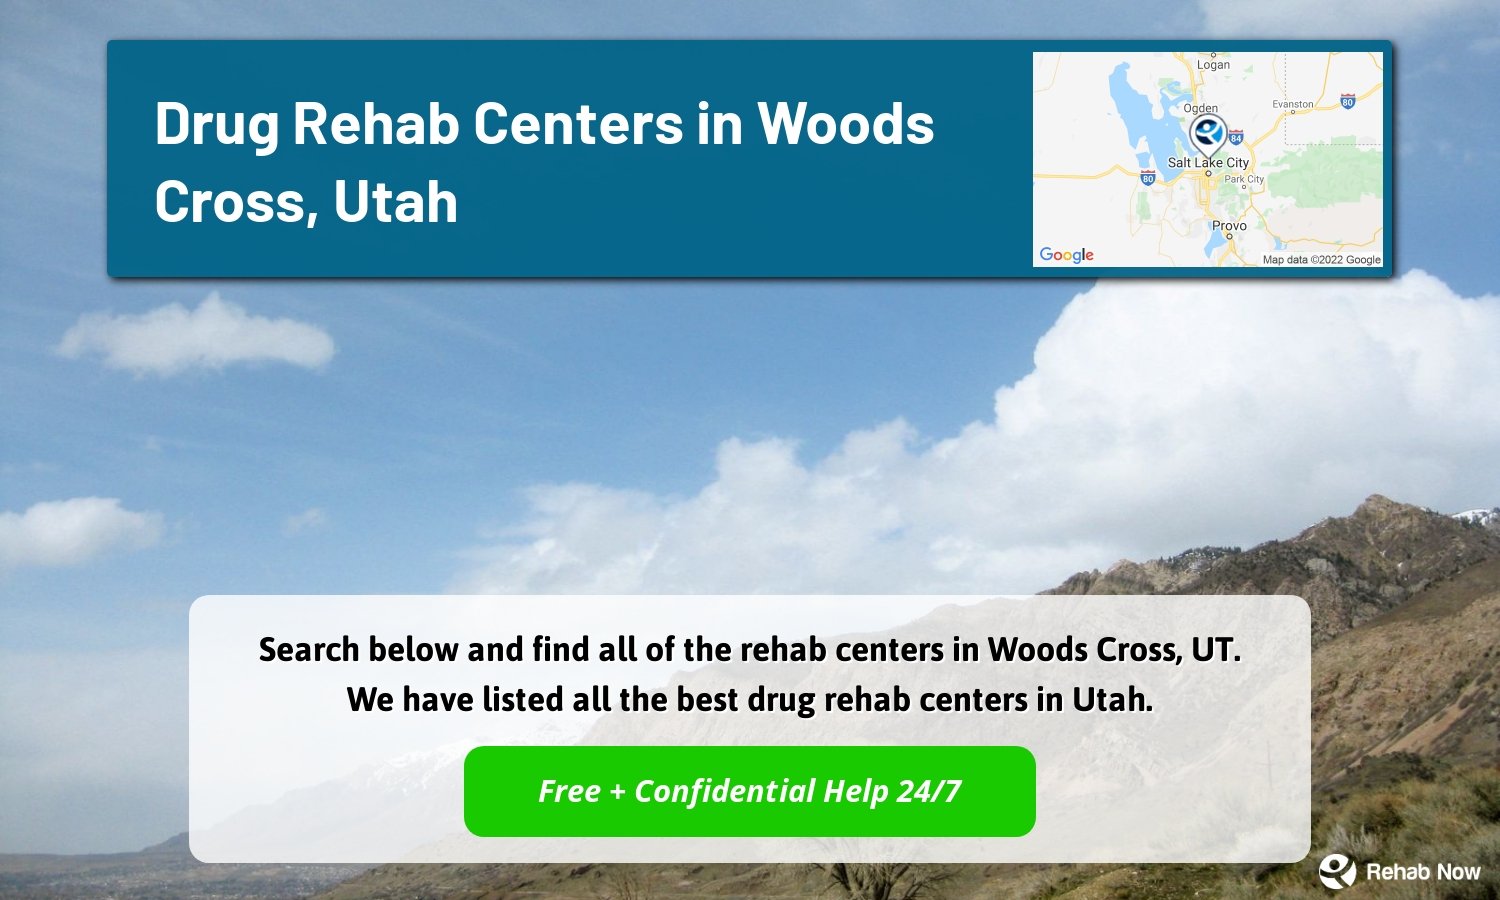 Search below and find all of the rehab centers in Woods Cross, UT. We have listed all the best drug rehab centers in Utah.